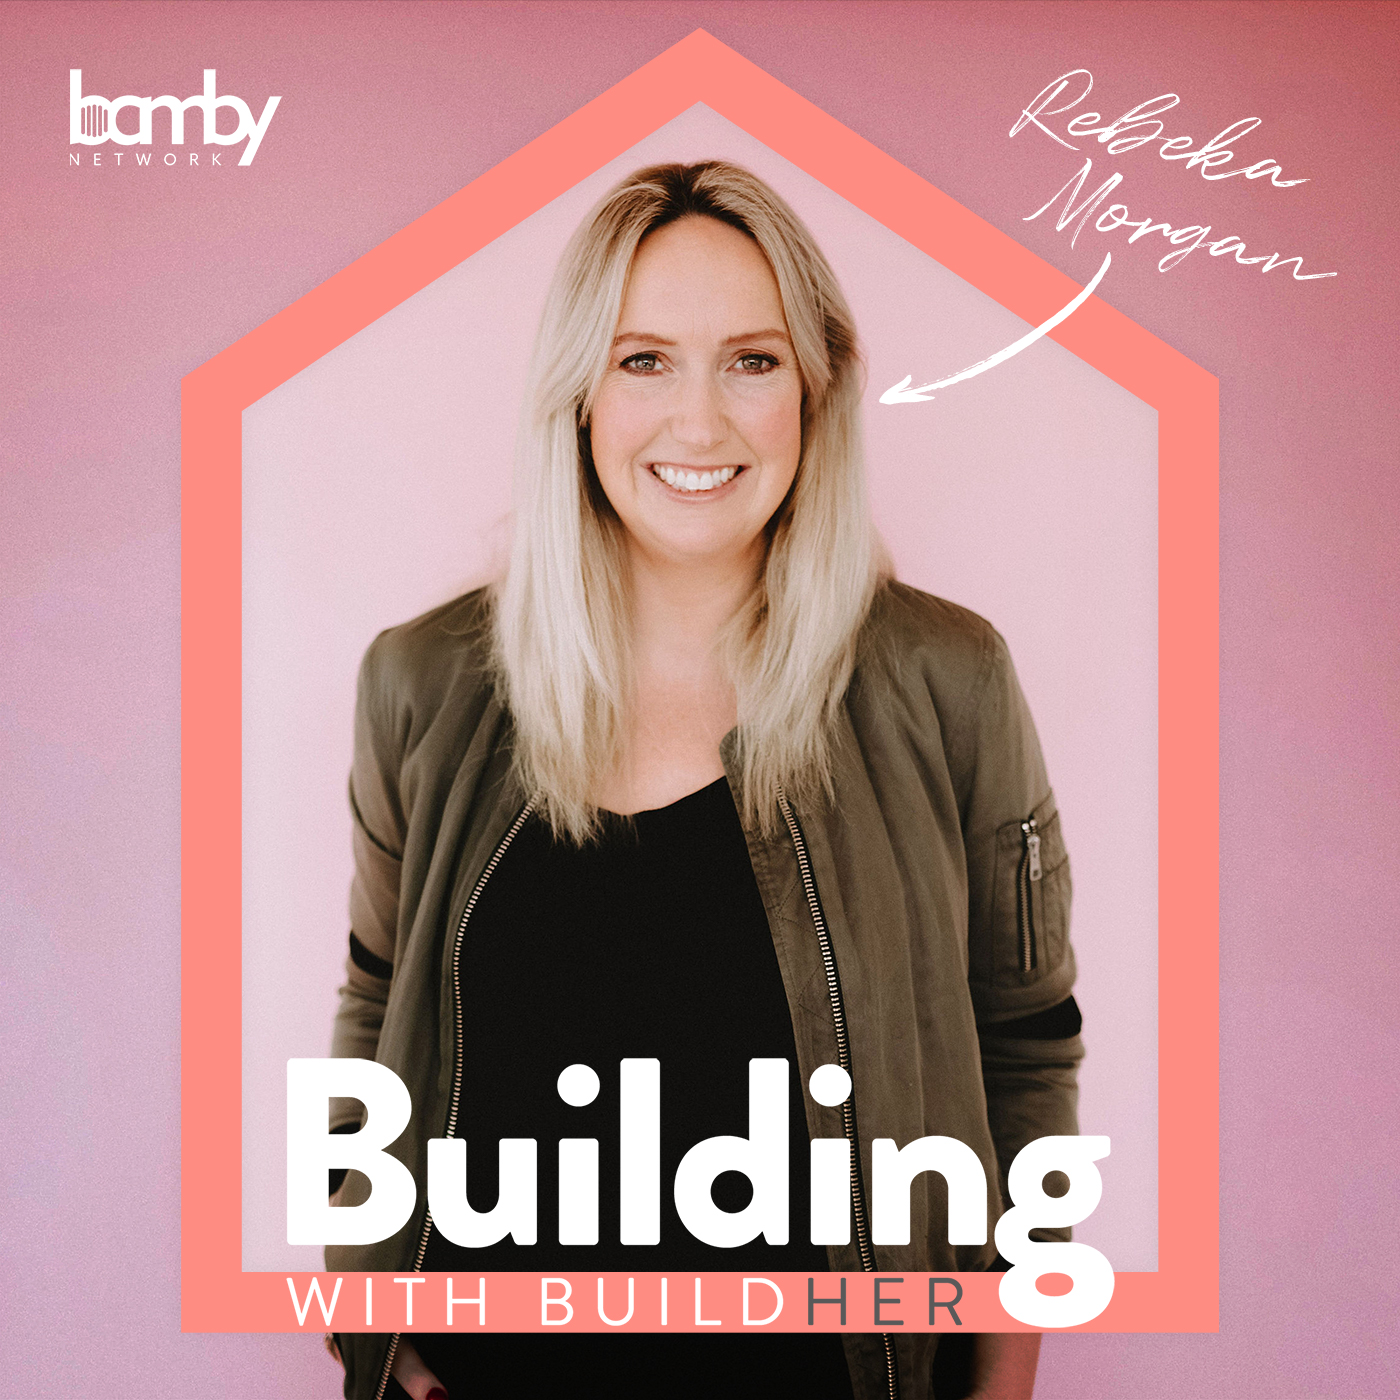 Using the 'Design Team and Tender' Building Method with Barbara Ramsey